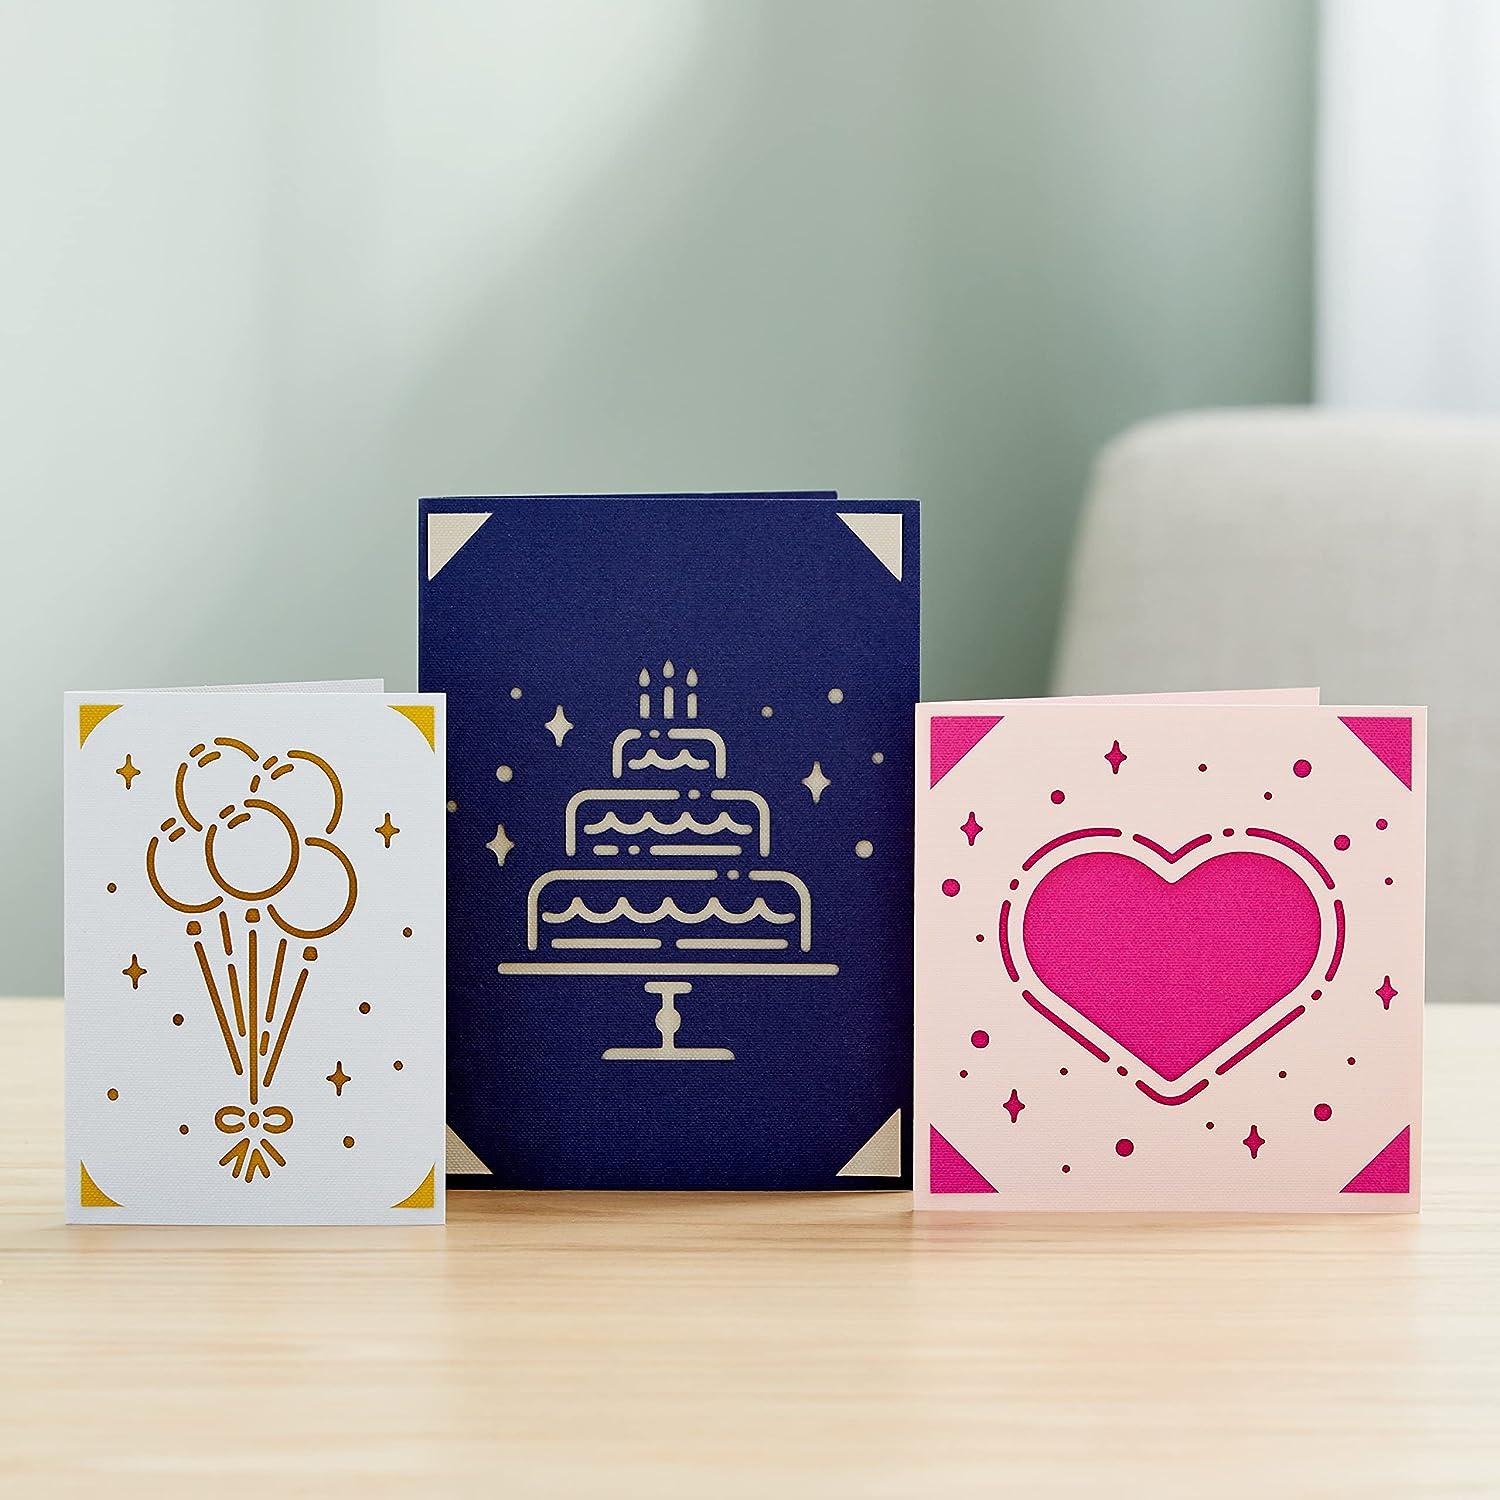 Cricut Insert Cards S40, Create Depth-Filled Birthday Cards, Thank You  Cards, Custom Greeting Cards at Home, Compatible with Cricut  Joy/Maker/Explore Machines, Princess Sampler (35 ct)